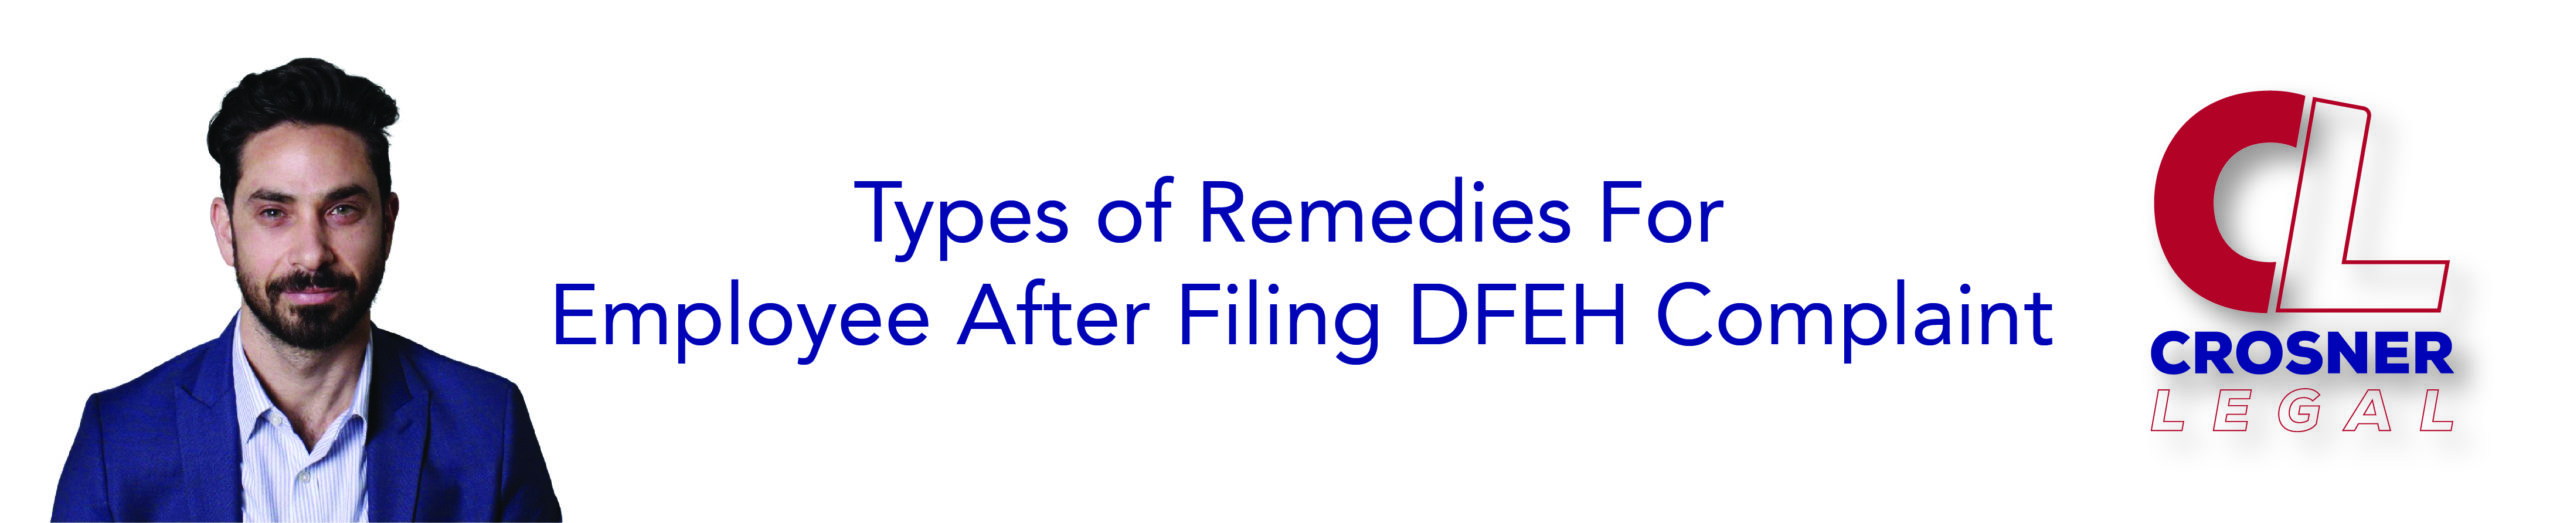 Types of Remedies For Employee After Filing DFEH Complaint